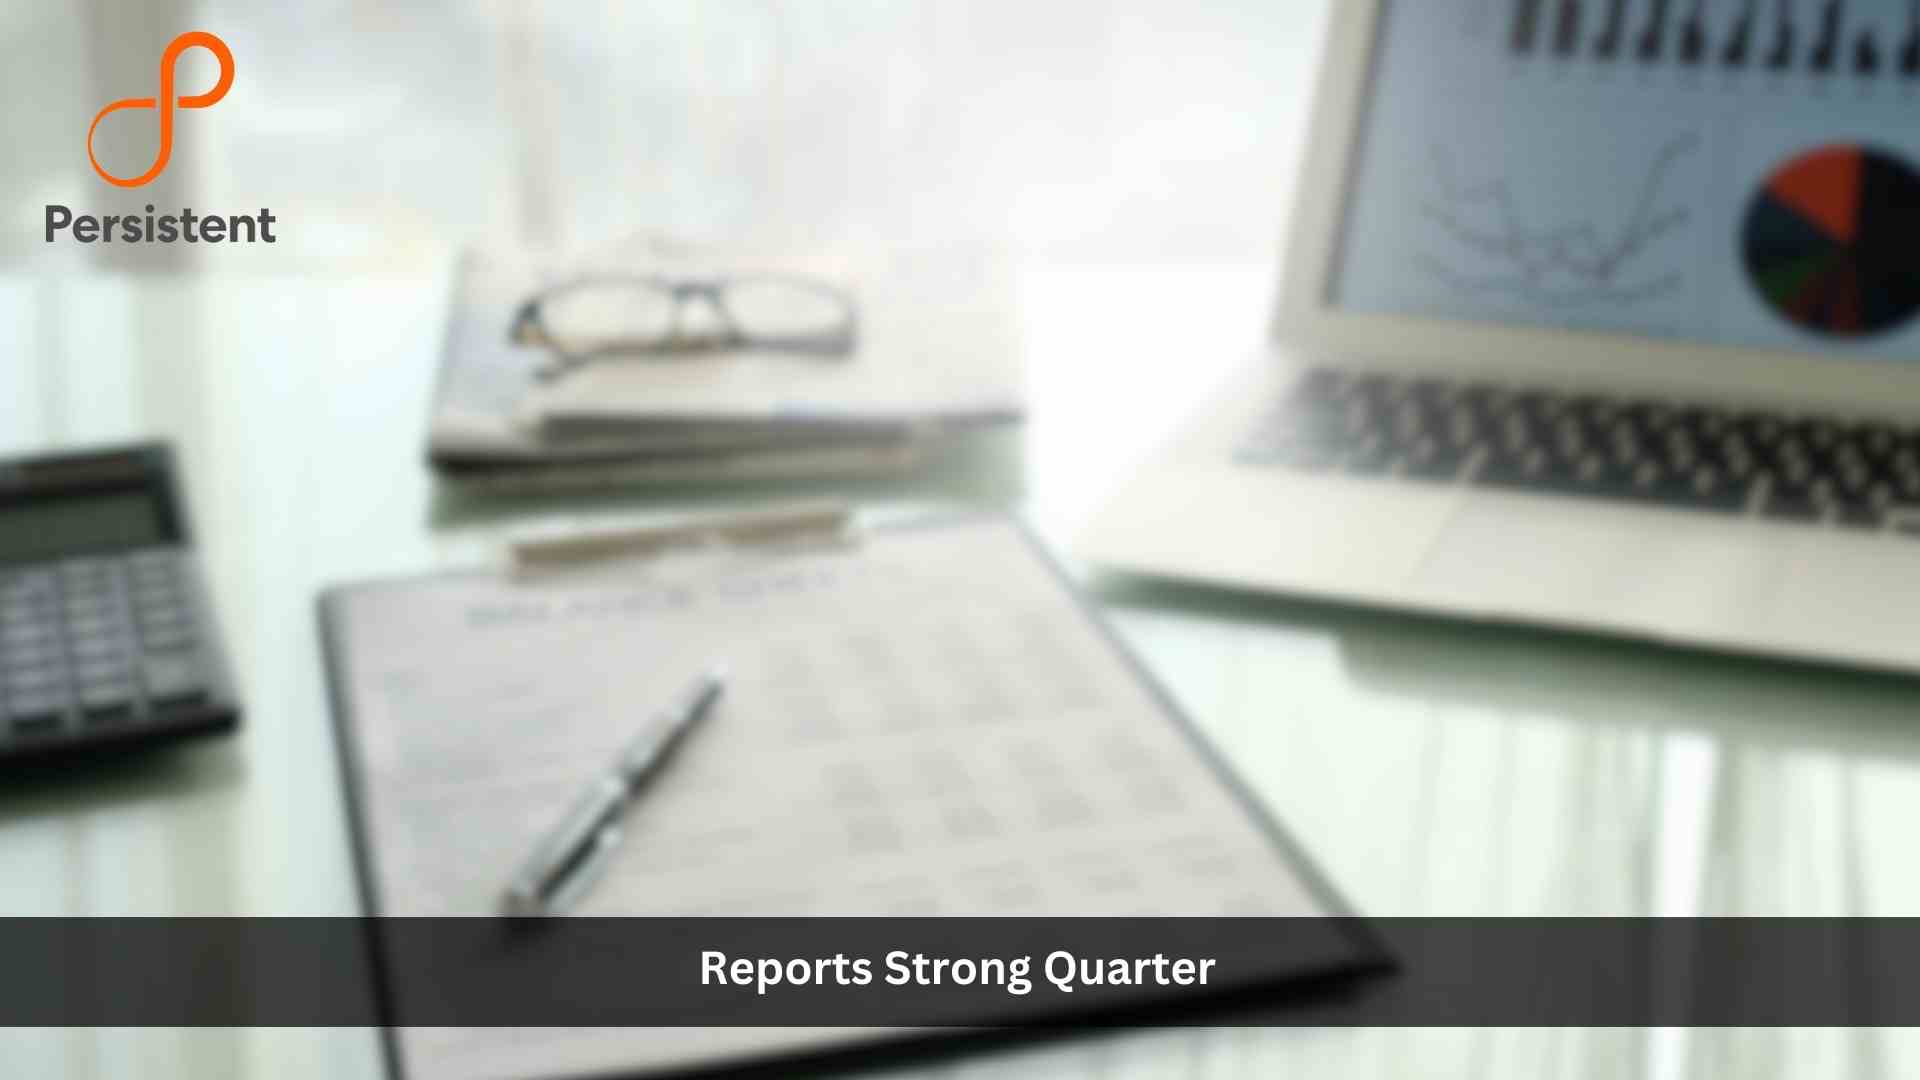 Persistent Reports Strong Quarter with Revenue Increases of 3.1% QoQ and 14.1% YoY and Orders Receiving More Than $475 Million in Total Contract Value